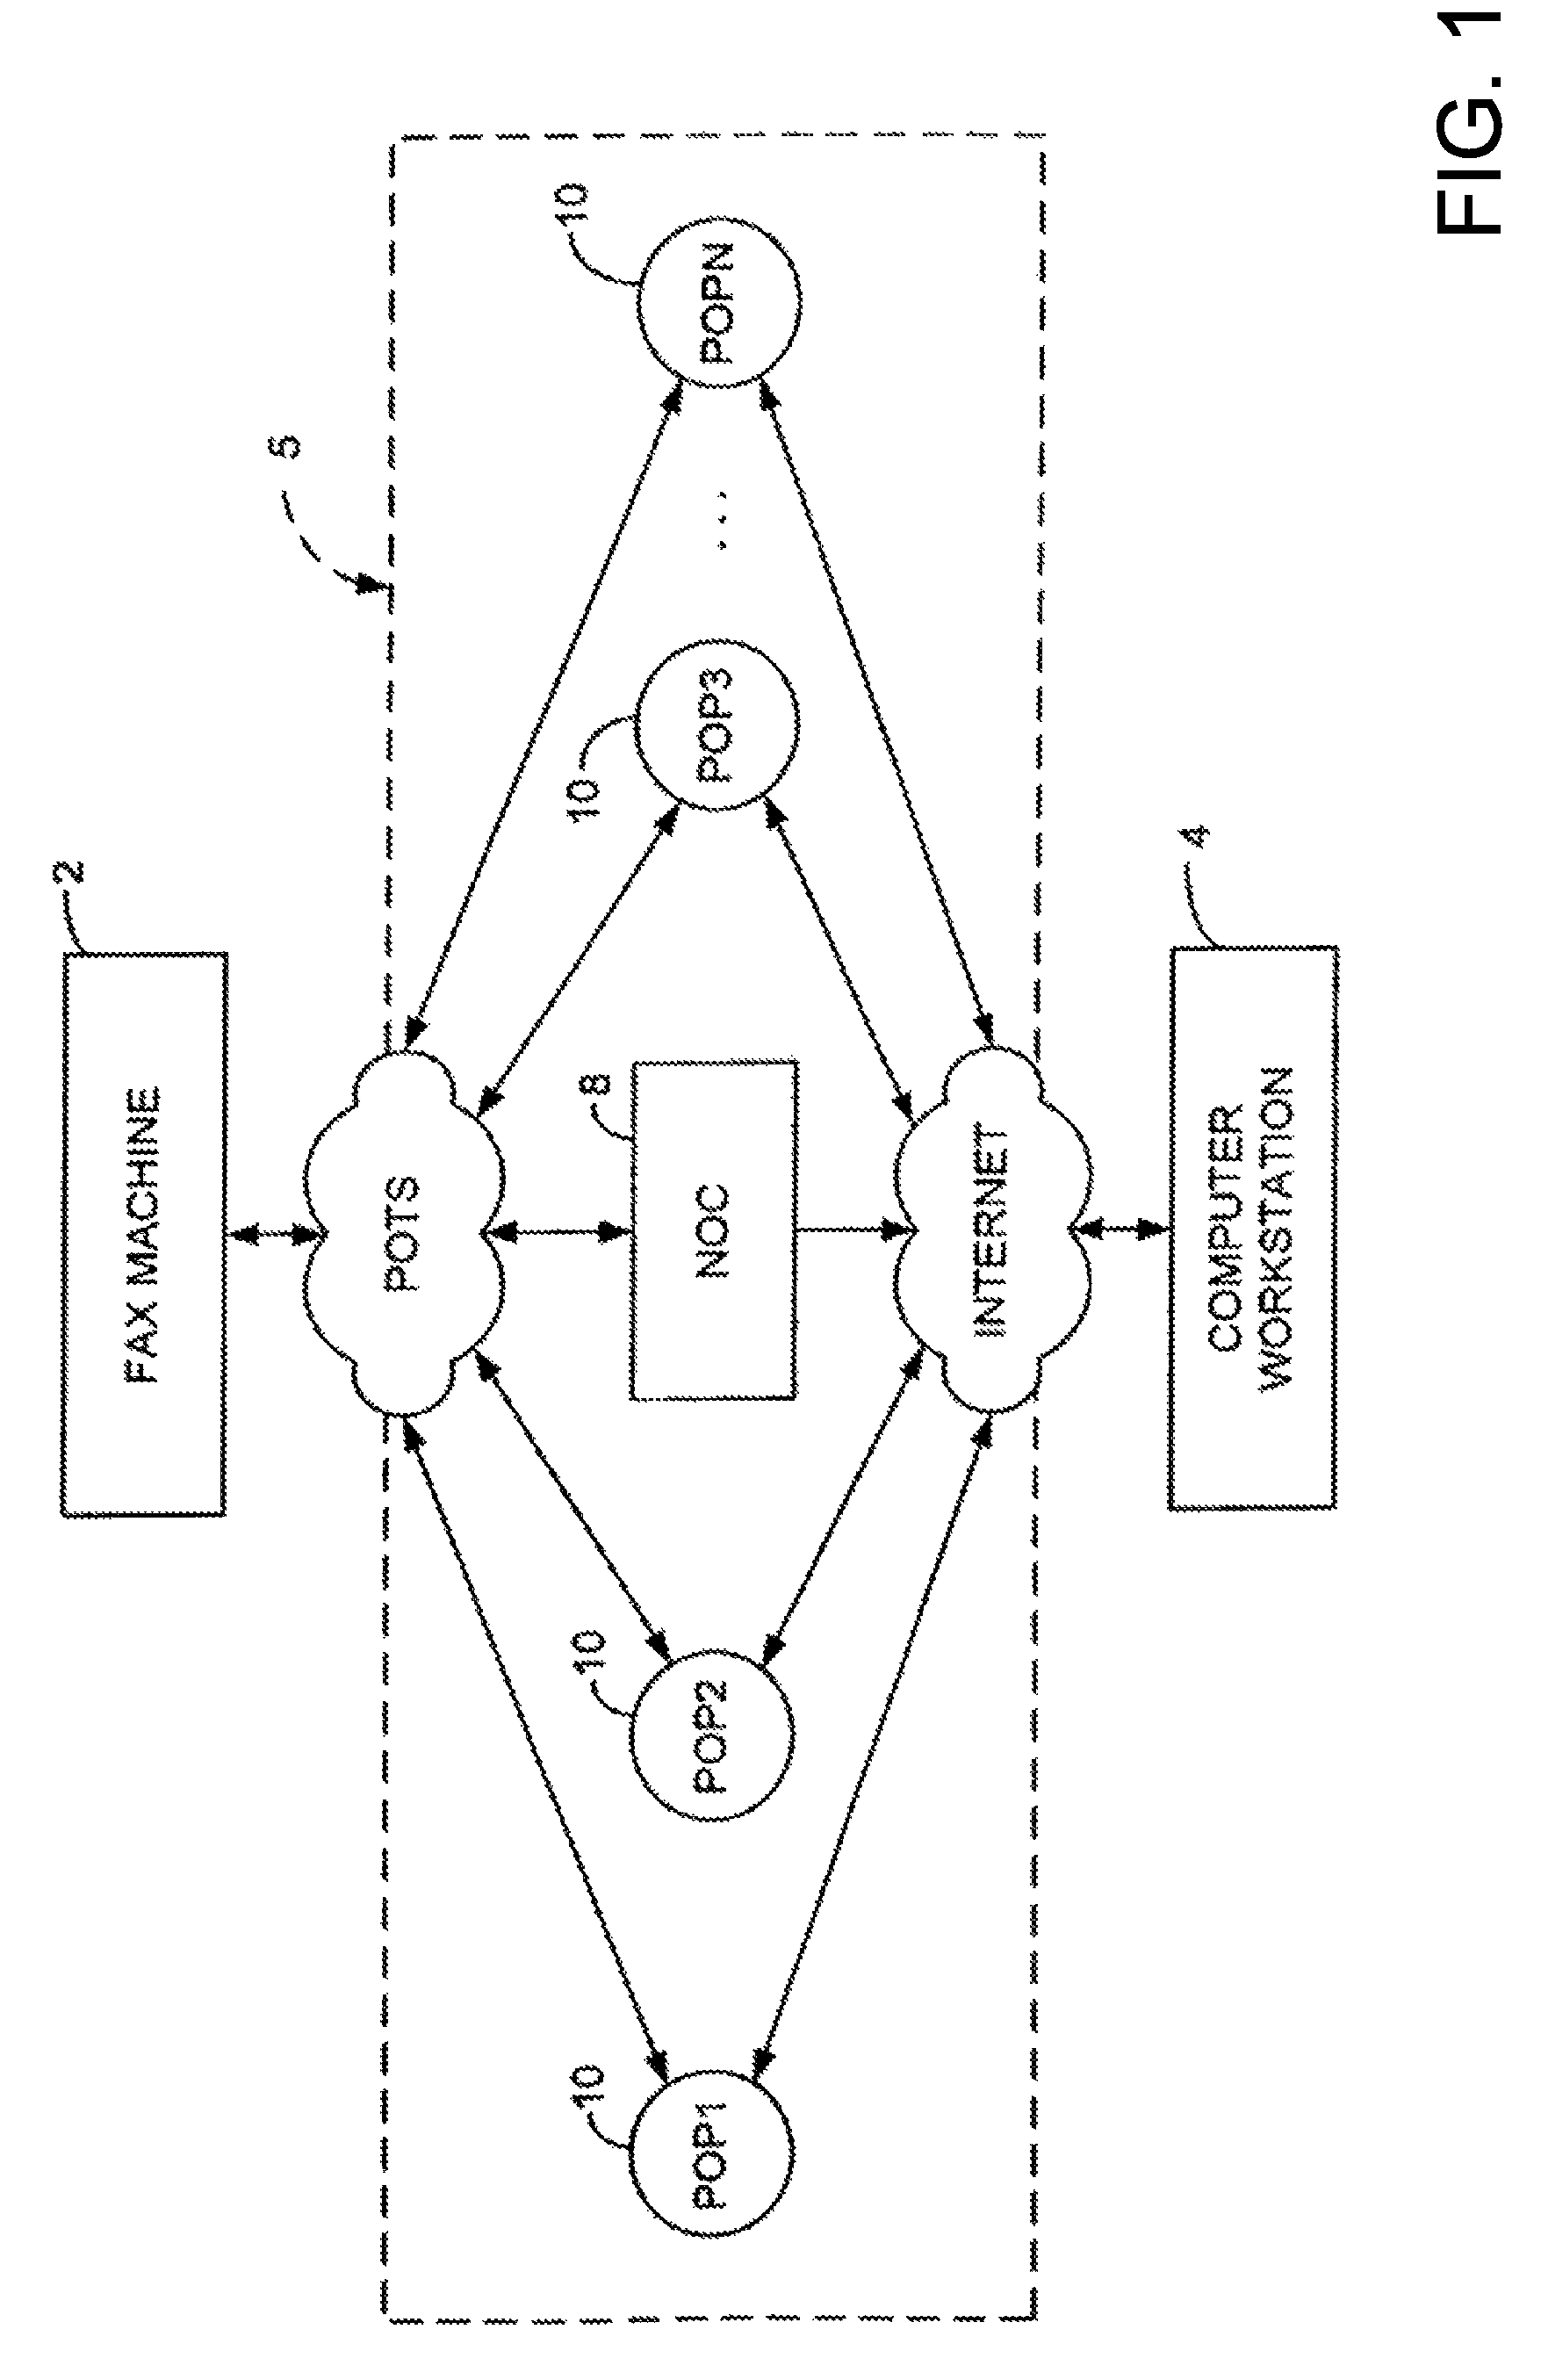 Methods and apparatus for facsimile transmissions to electronic storage destinations including embedded barcode fonts